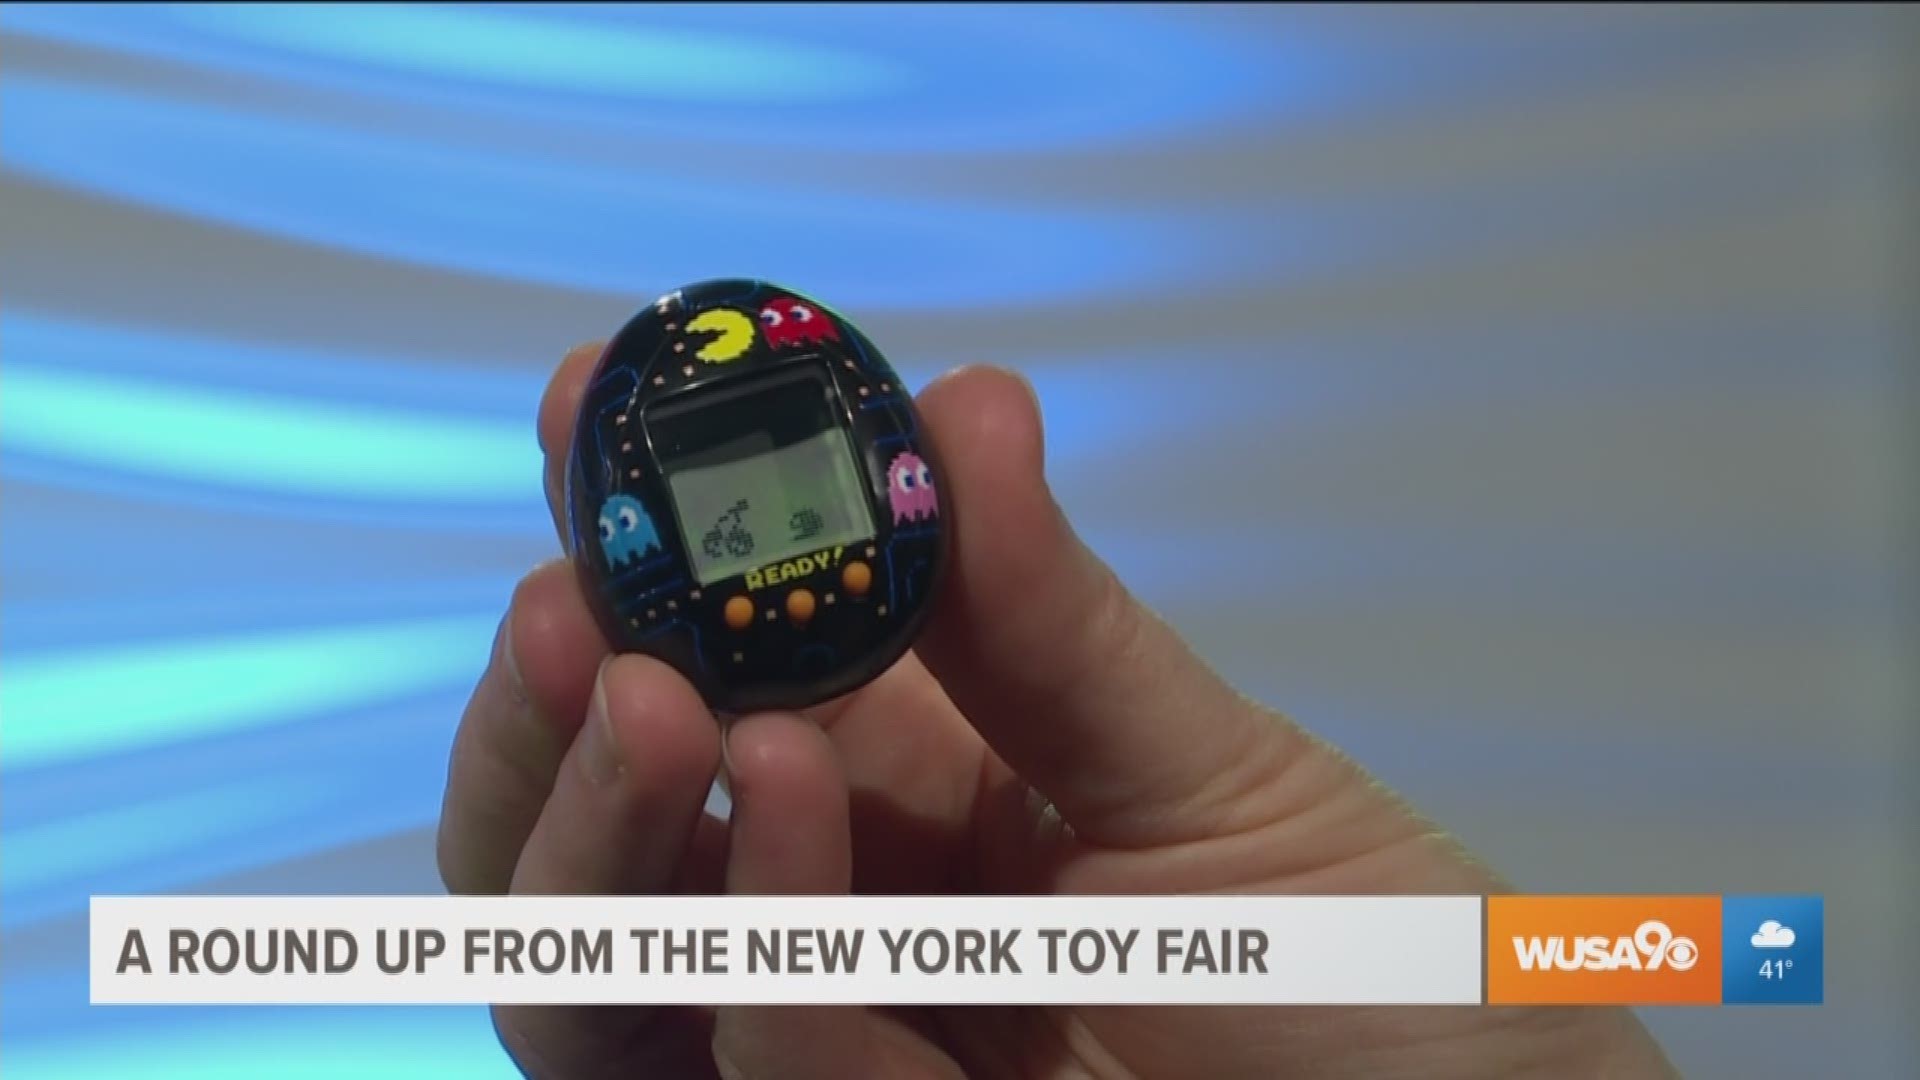 Toy expert Reyne Rice shares this year's hottest toys newly released at the New York Toy Fair. This segment is sponsored by www.DailyLounge.com.